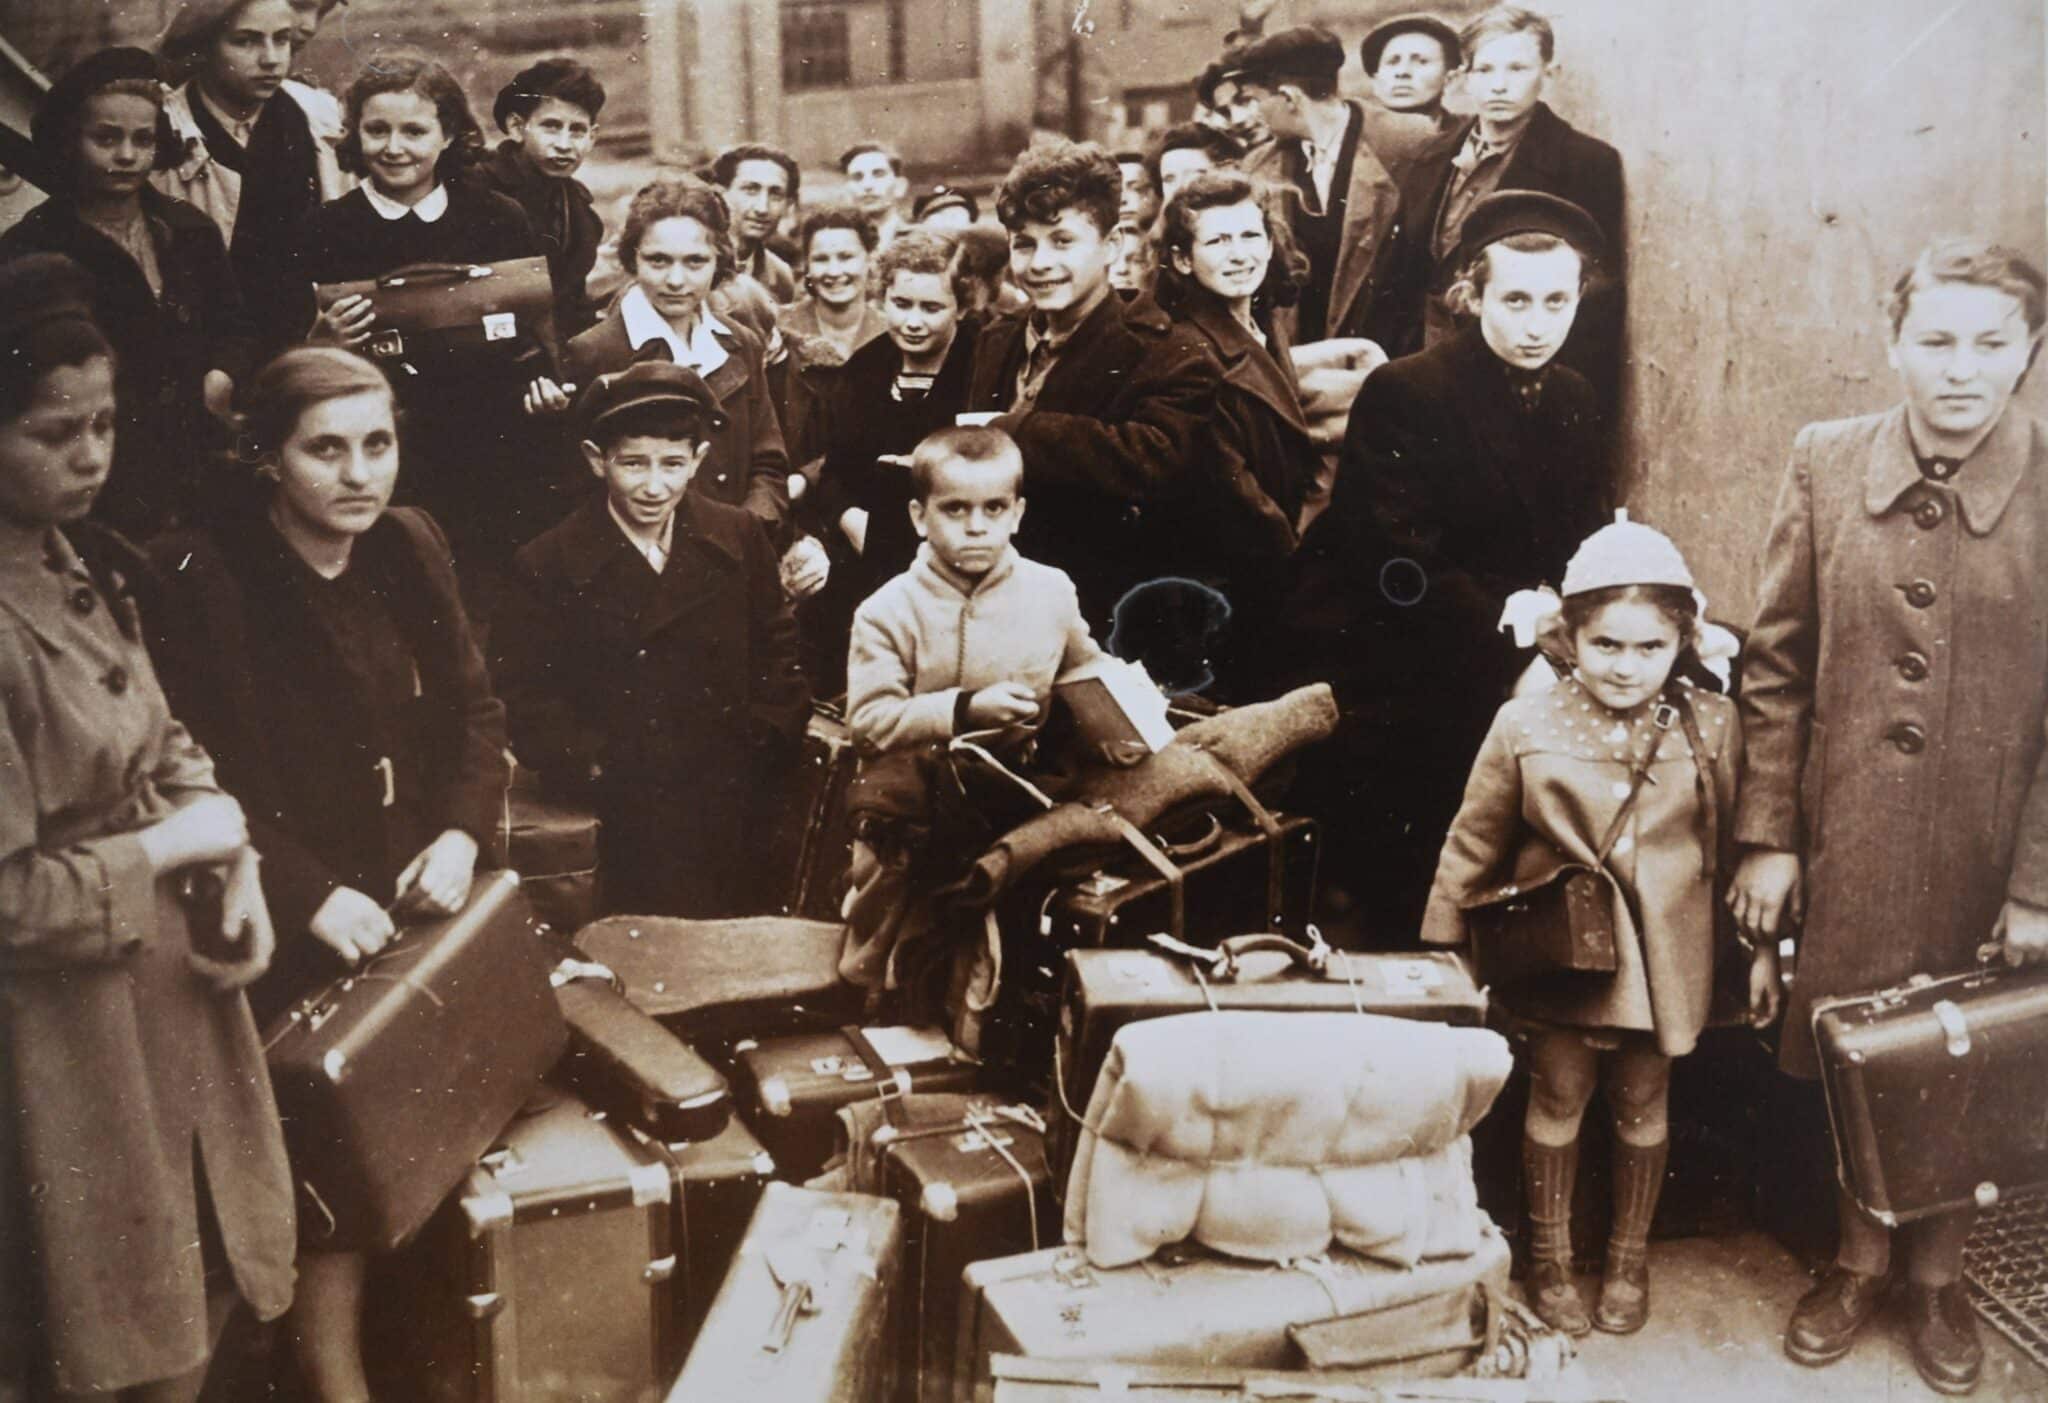 A photo of Holocaust survivor Alex Rosin, 83, born in Poland in 1940, with children on a ship from Poland to England in 1947. He is the boy in the front center with a light jacket. Rosin was saved by living with a Catholic woman in rural Poland. (OSV News photo/Debbie Hill)